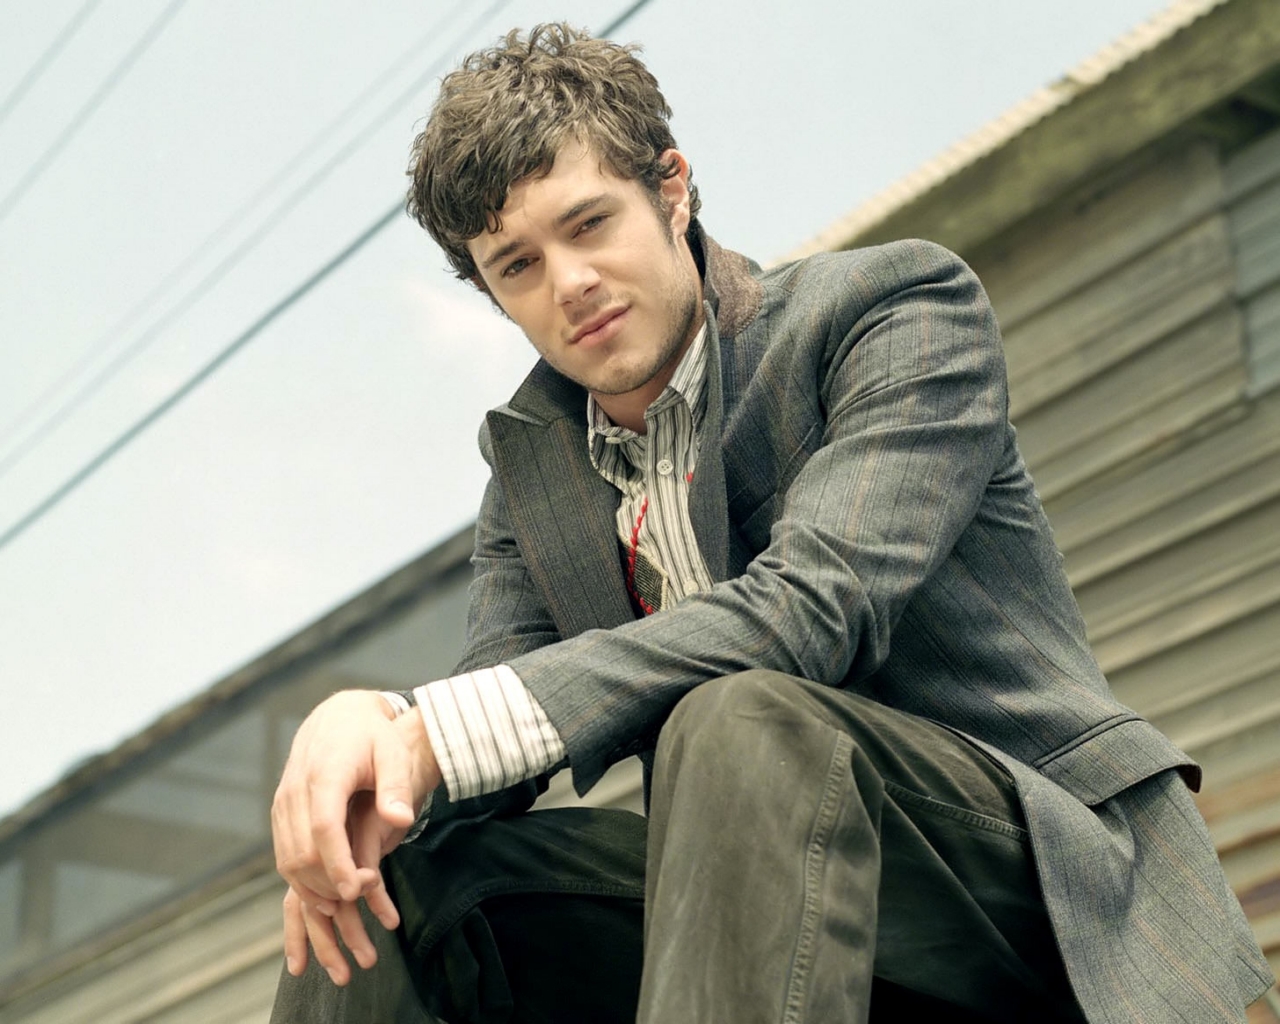 Adam Brody Profile,Bio,Images,Pictures And Wallpapers 2011 | Hot